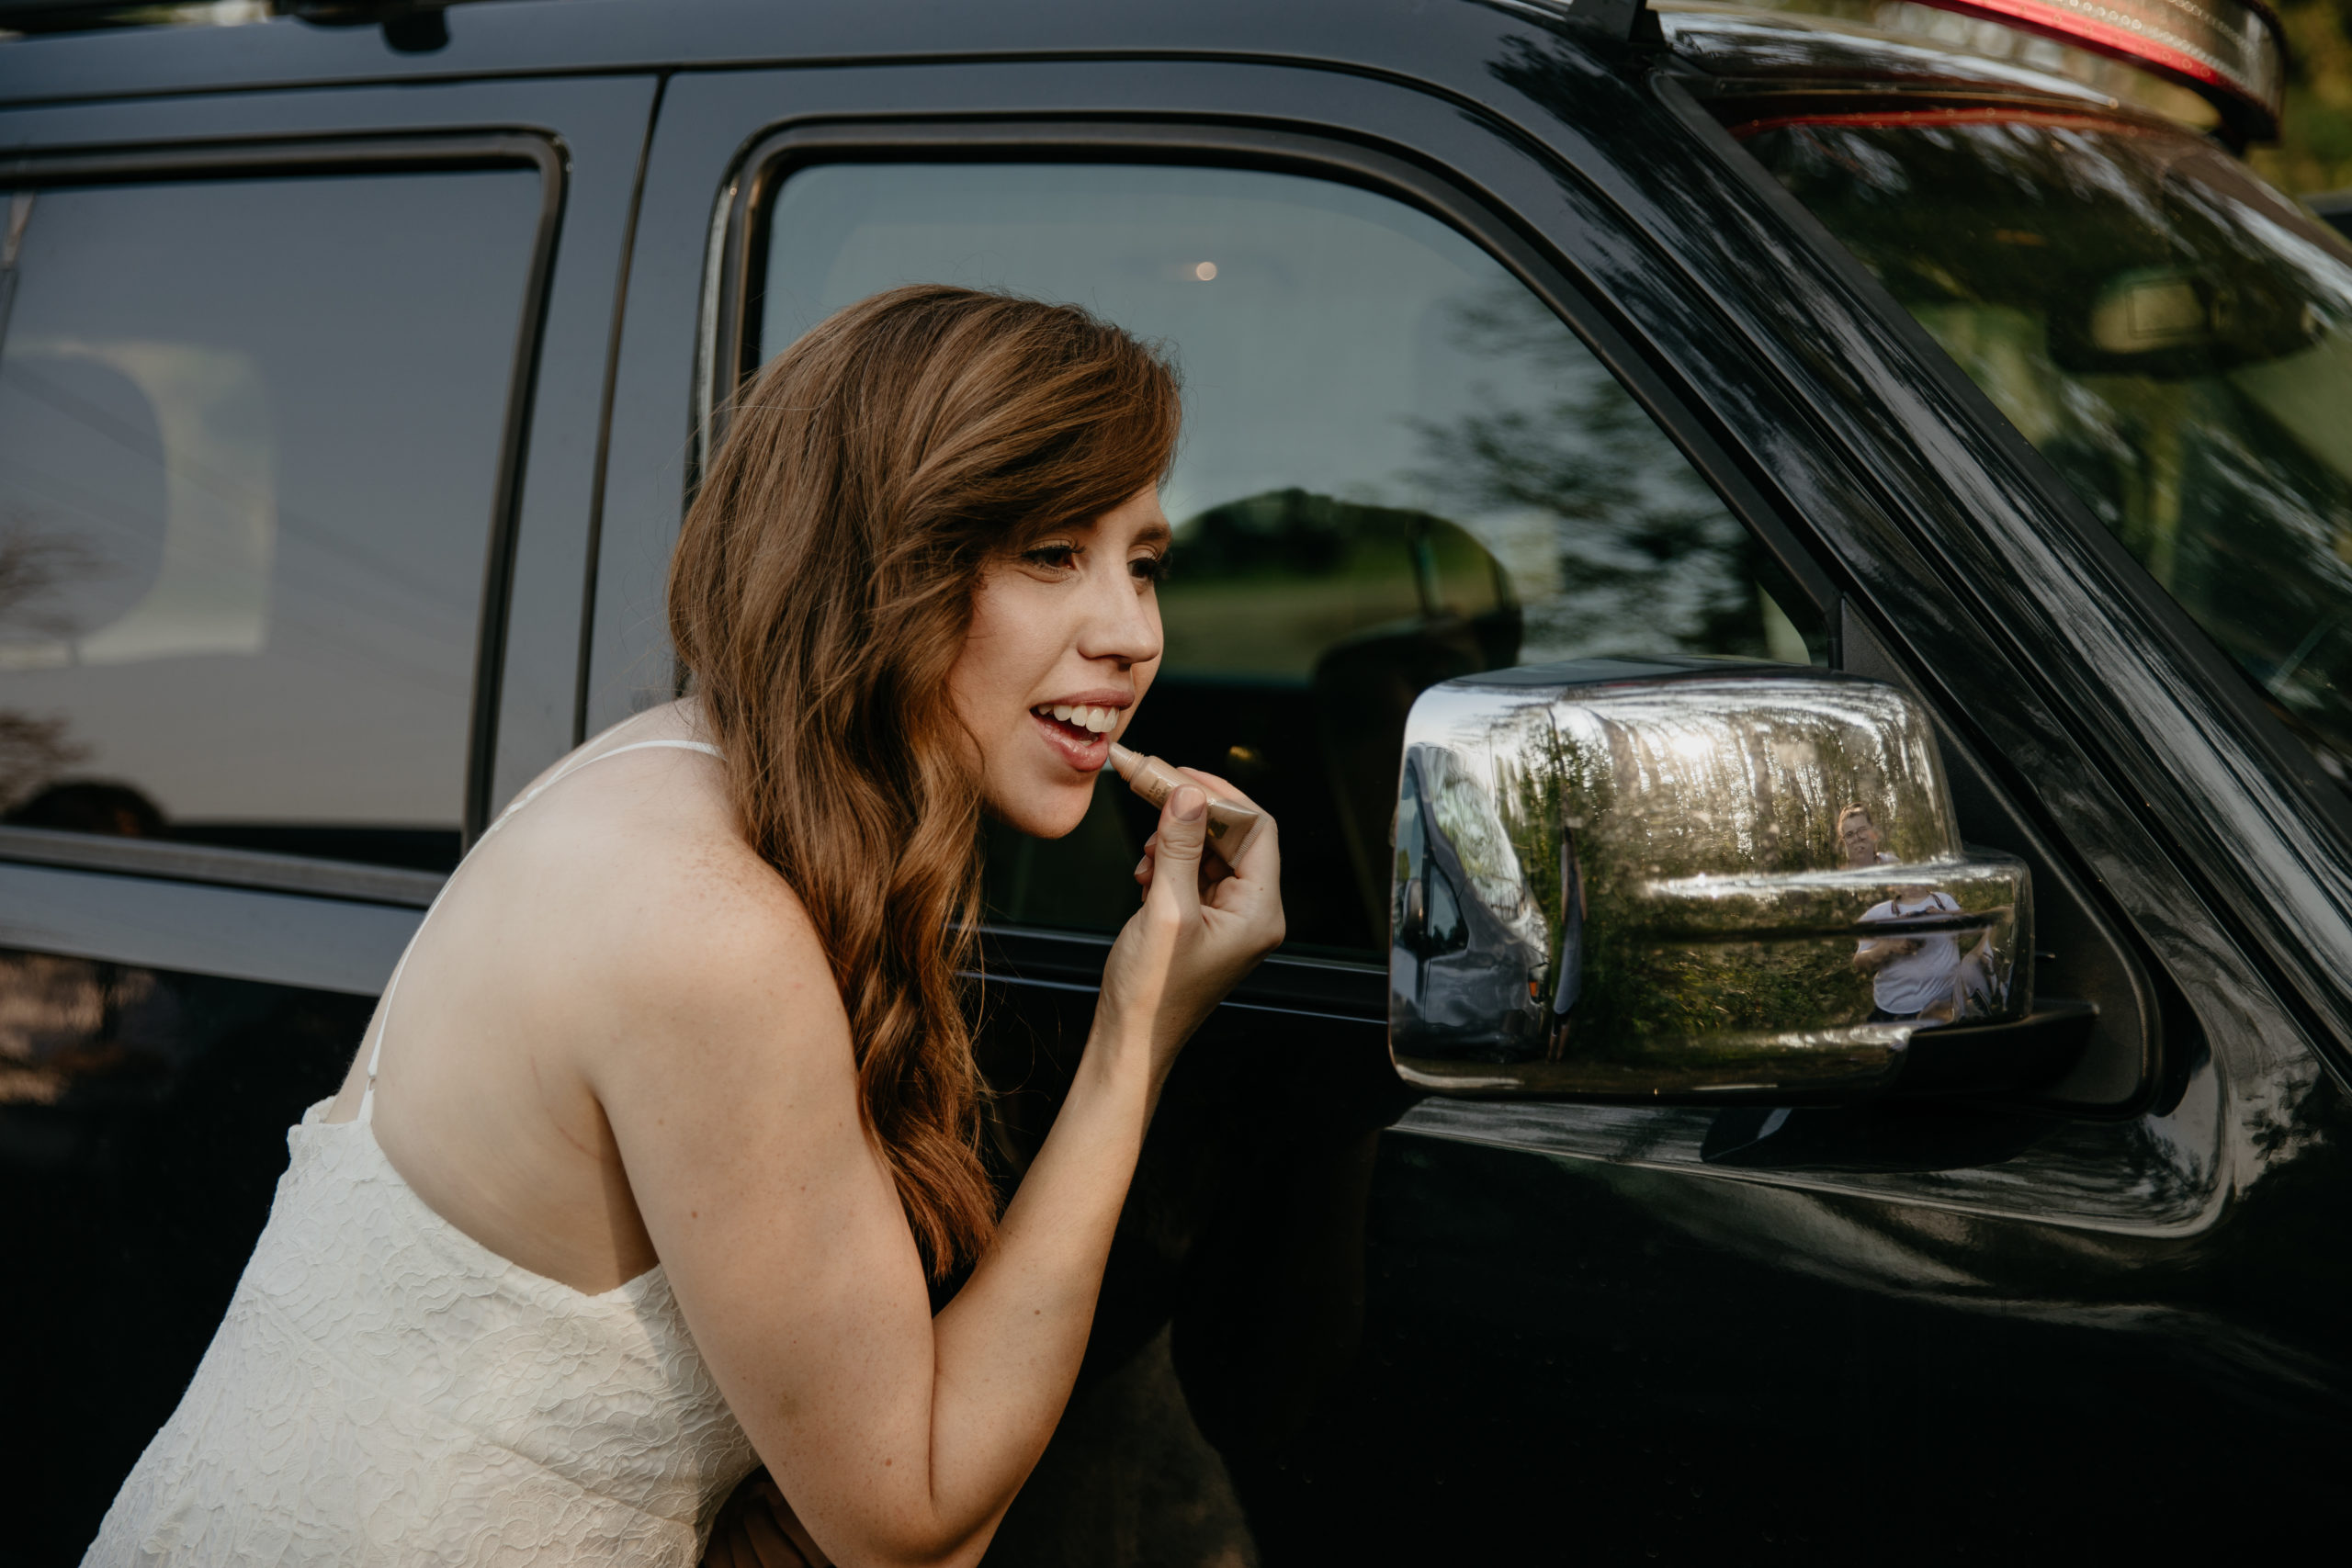 The bride putting on lipstick before their intimate Michigan elopement